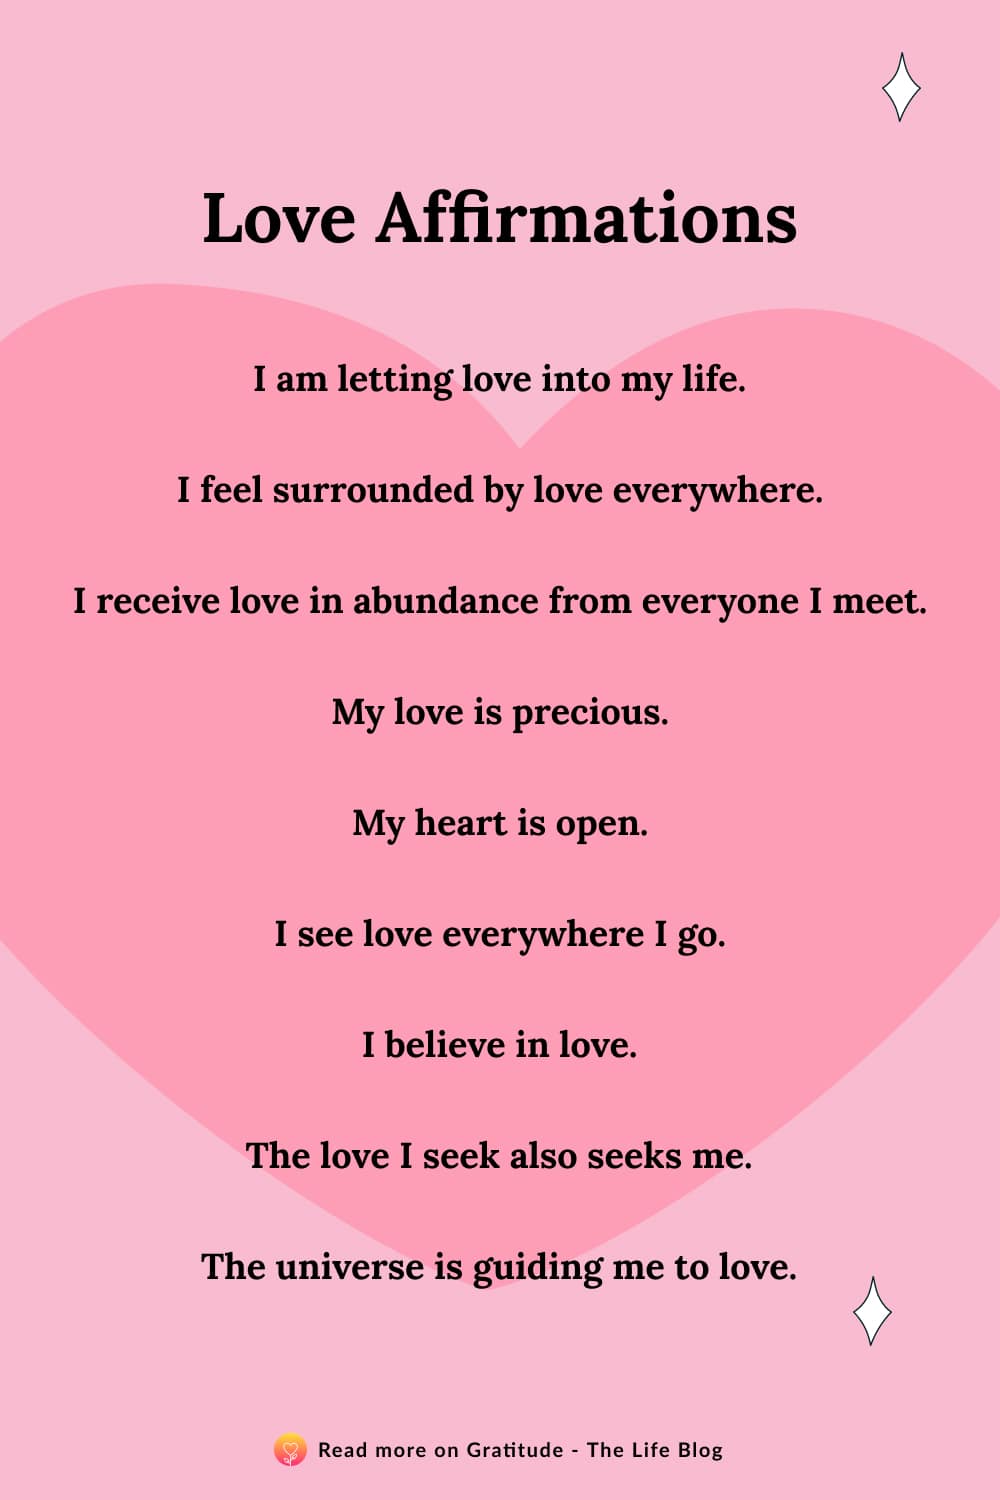 Image with list of love affirmations